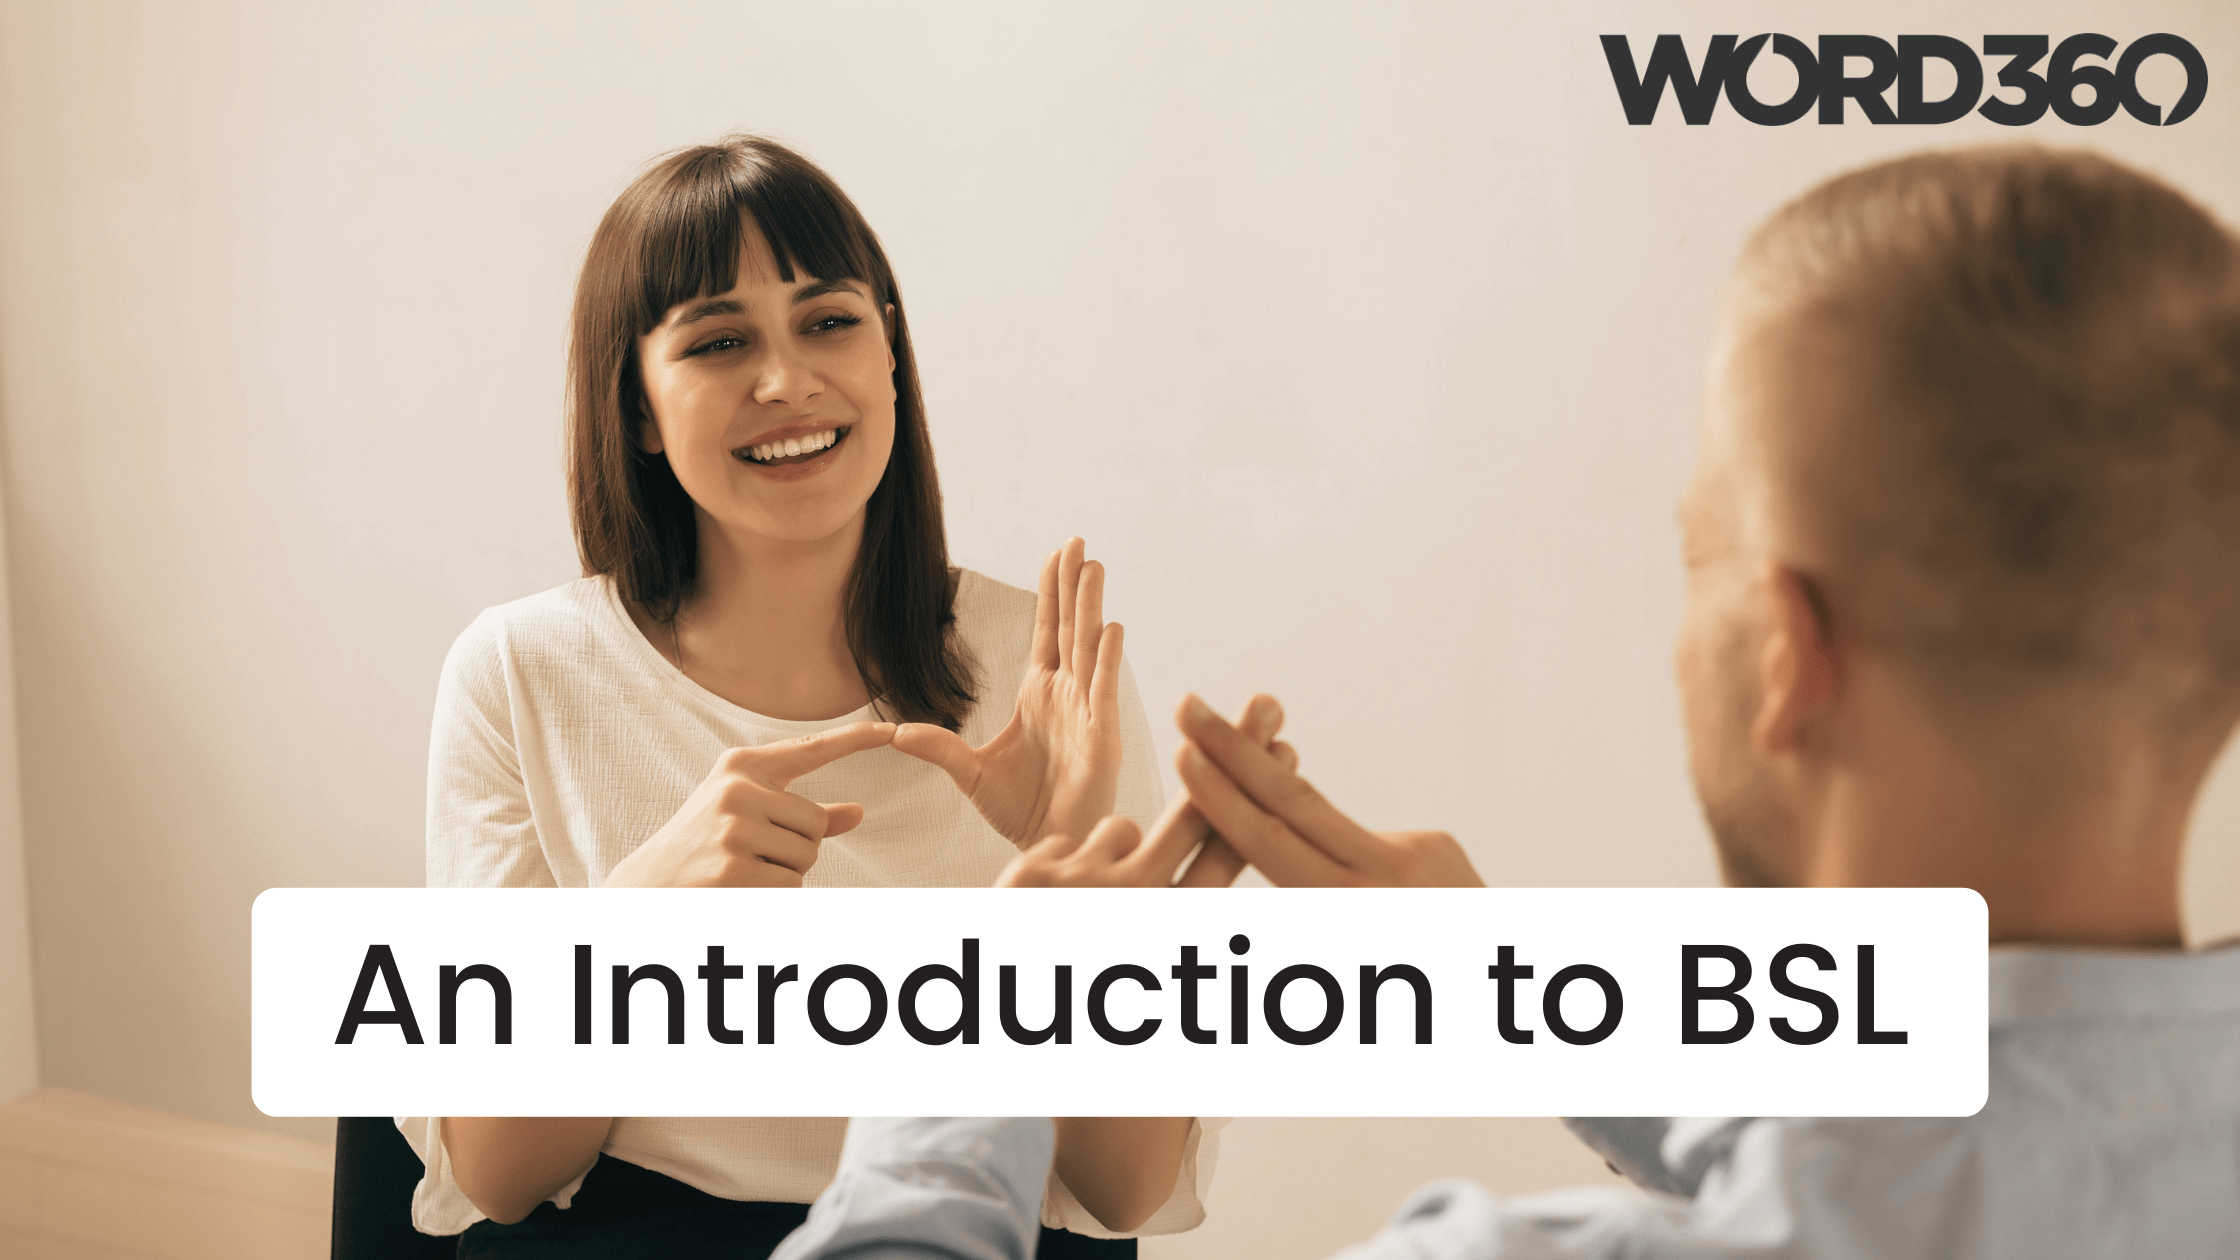 An Introduction to BSL